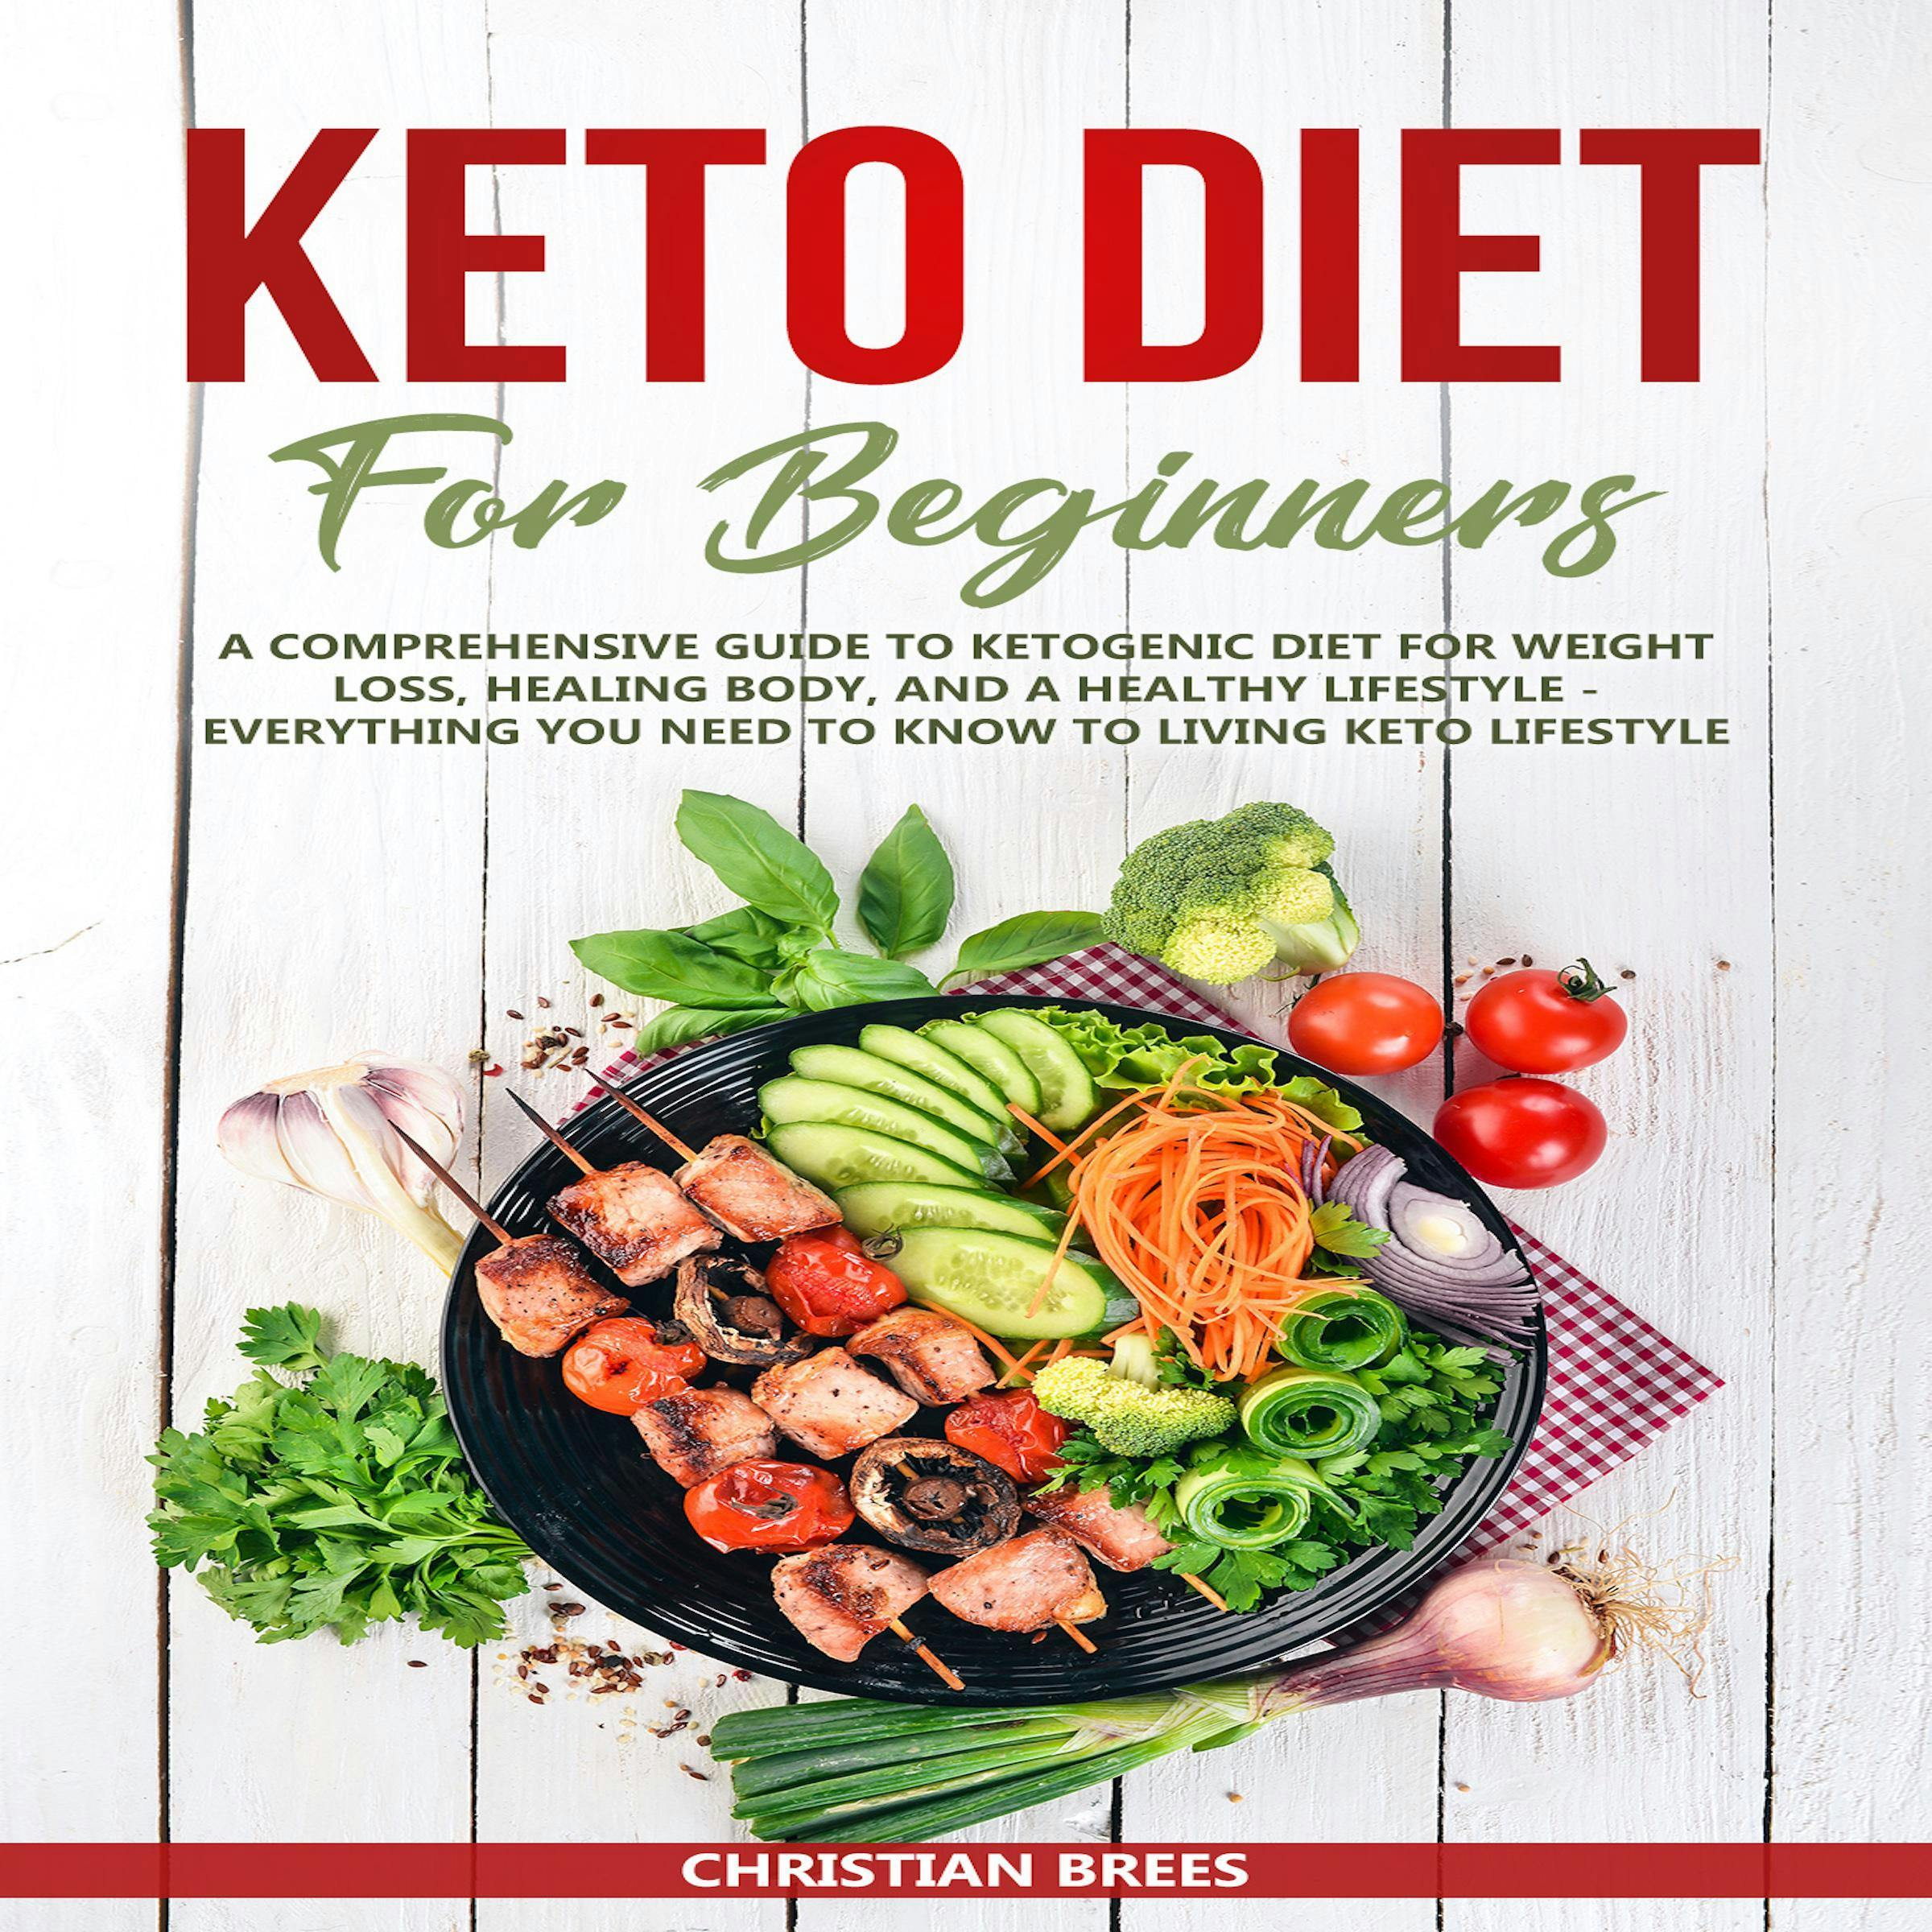 Keto Diet For Beginners : A Comprehensive Guide to Ketogenic Diet  for  Weight Loss, Healing Body, and a Healthy Lifestyle.   Everything You Need to Know to Living Keto Lifestyle - undefined